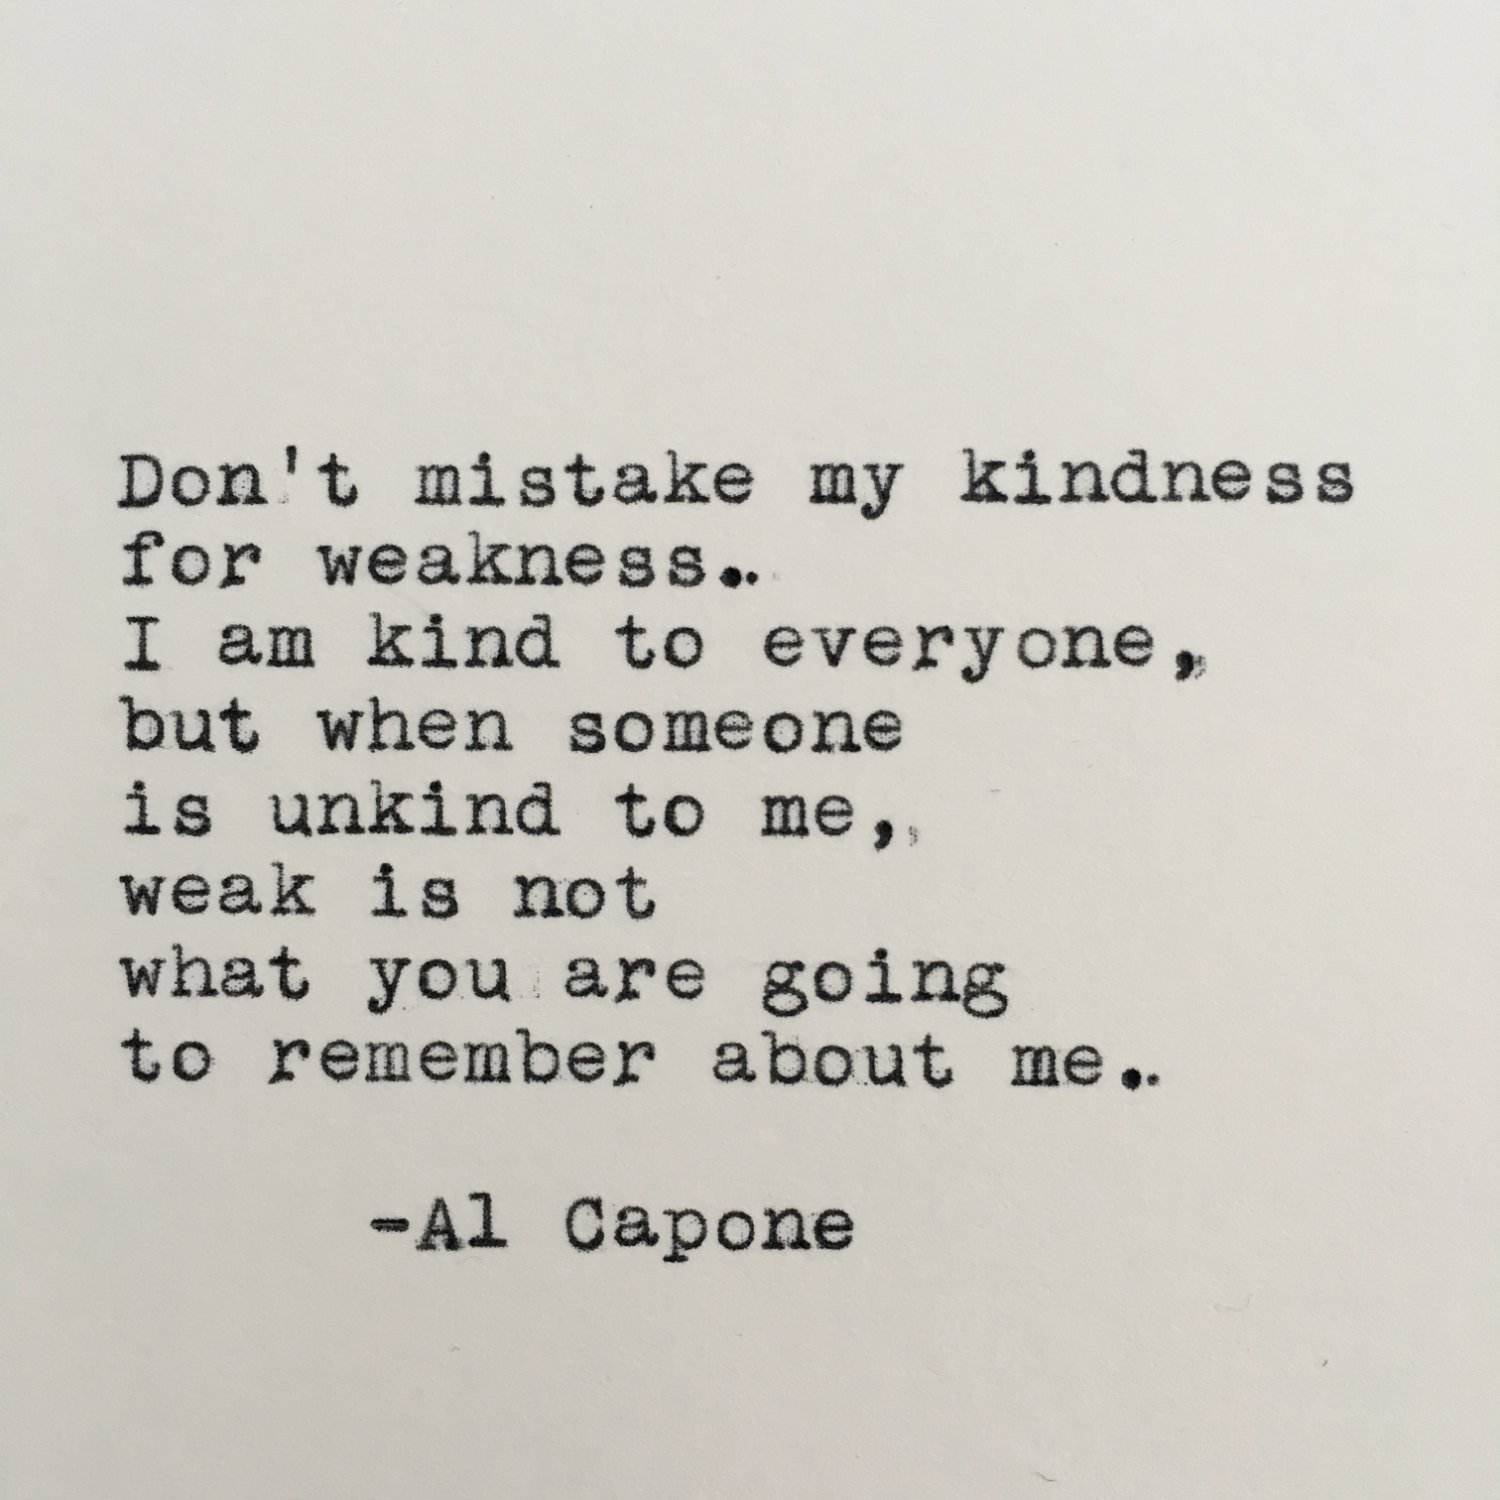 Al Capone Quote Kindness
 Al Capone Kindness Quote Typed on Typewriter 4x6 White